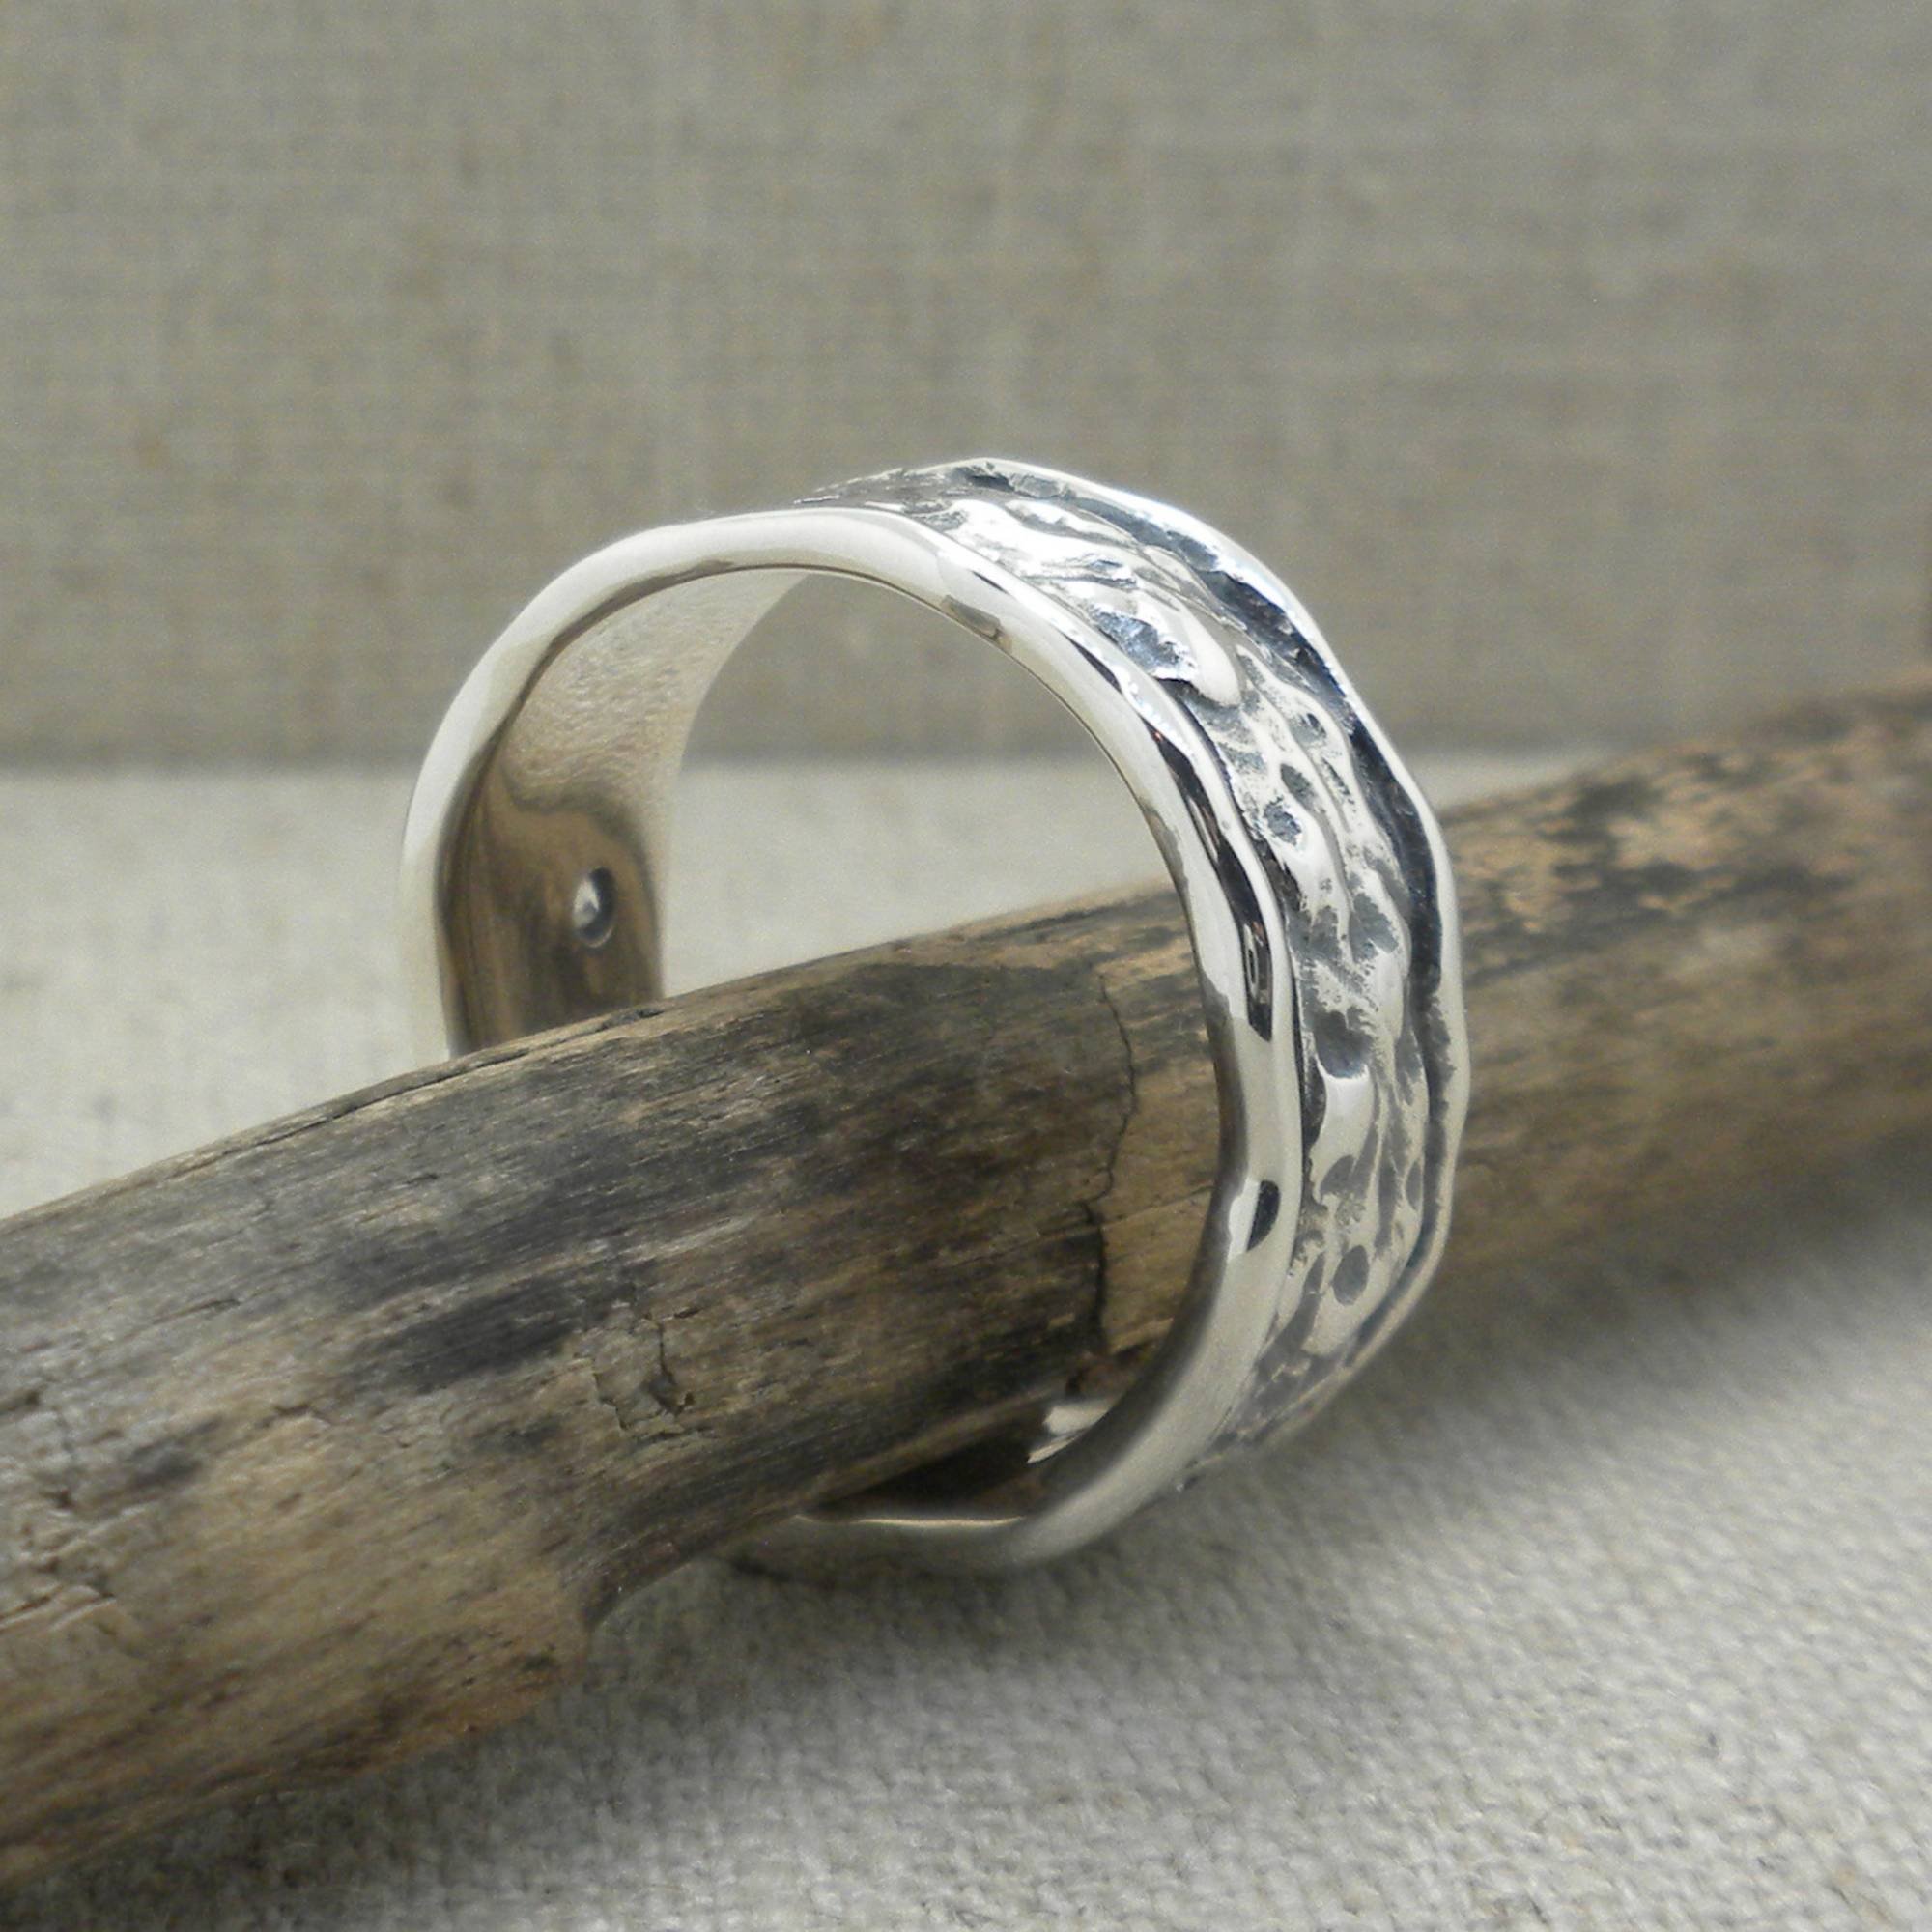 Sterling silver Wedding Ring by Keith Jack